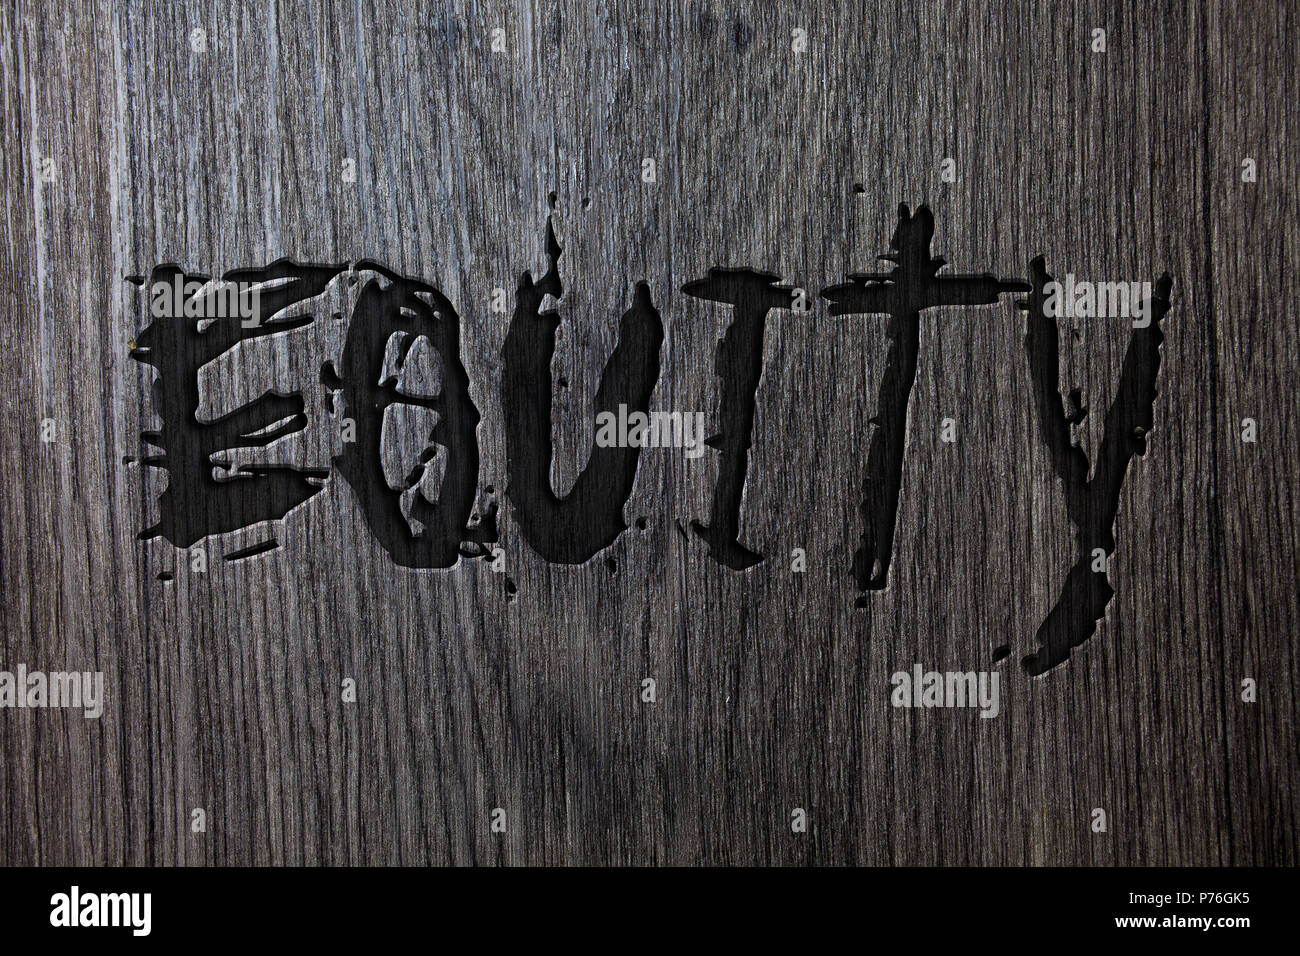 Word writing text Equity. Business concept for Value of a company divided into equal parts owned by shareholders Wooden wood background black engraved Stock Photo